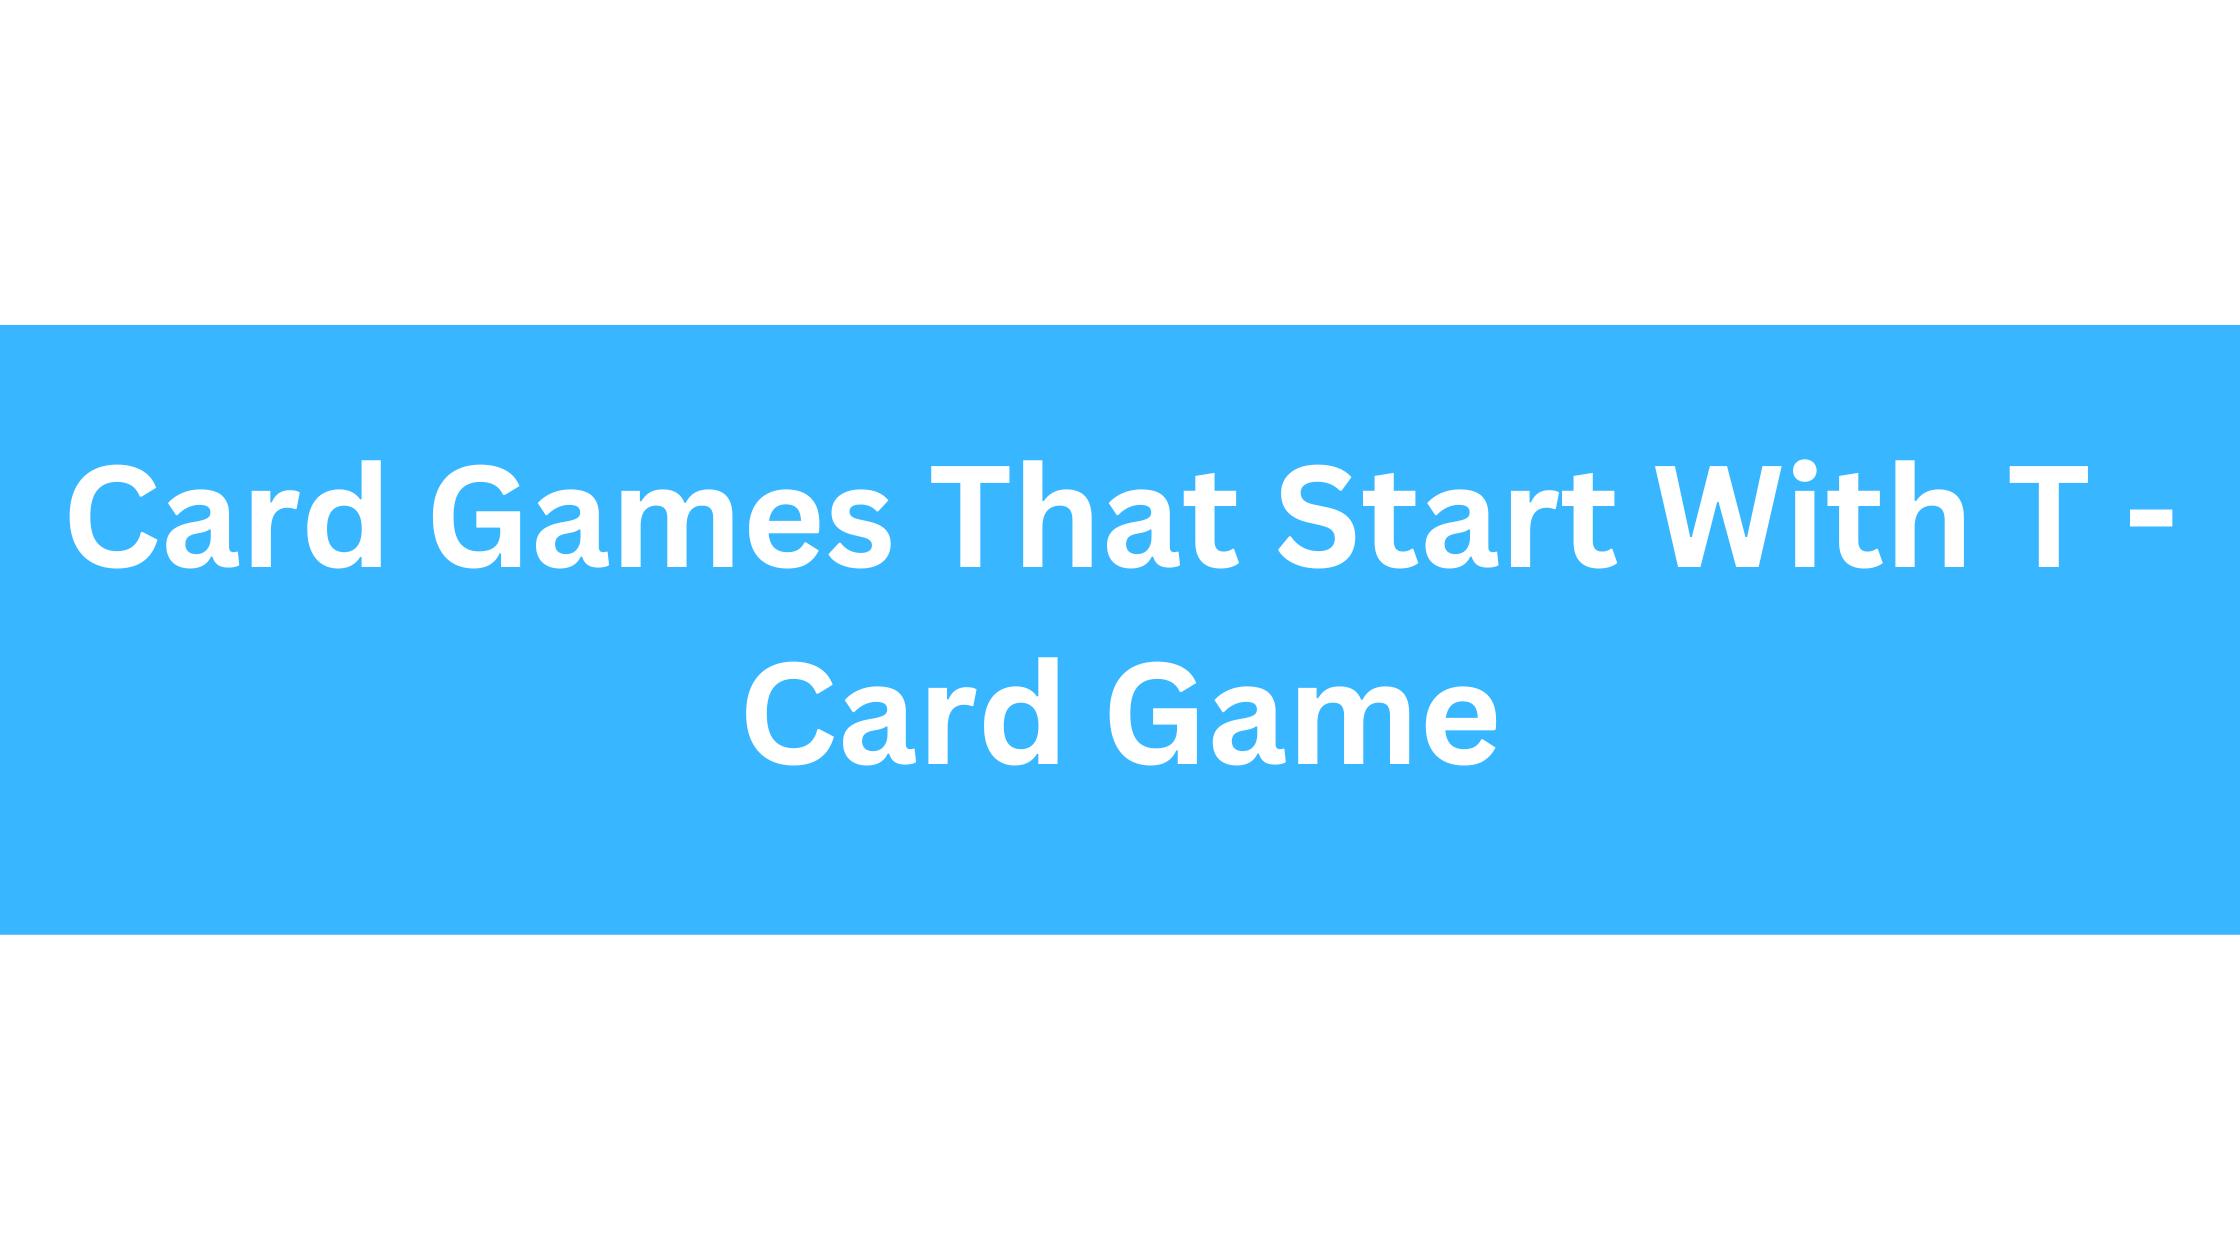 Card Games That Start With T